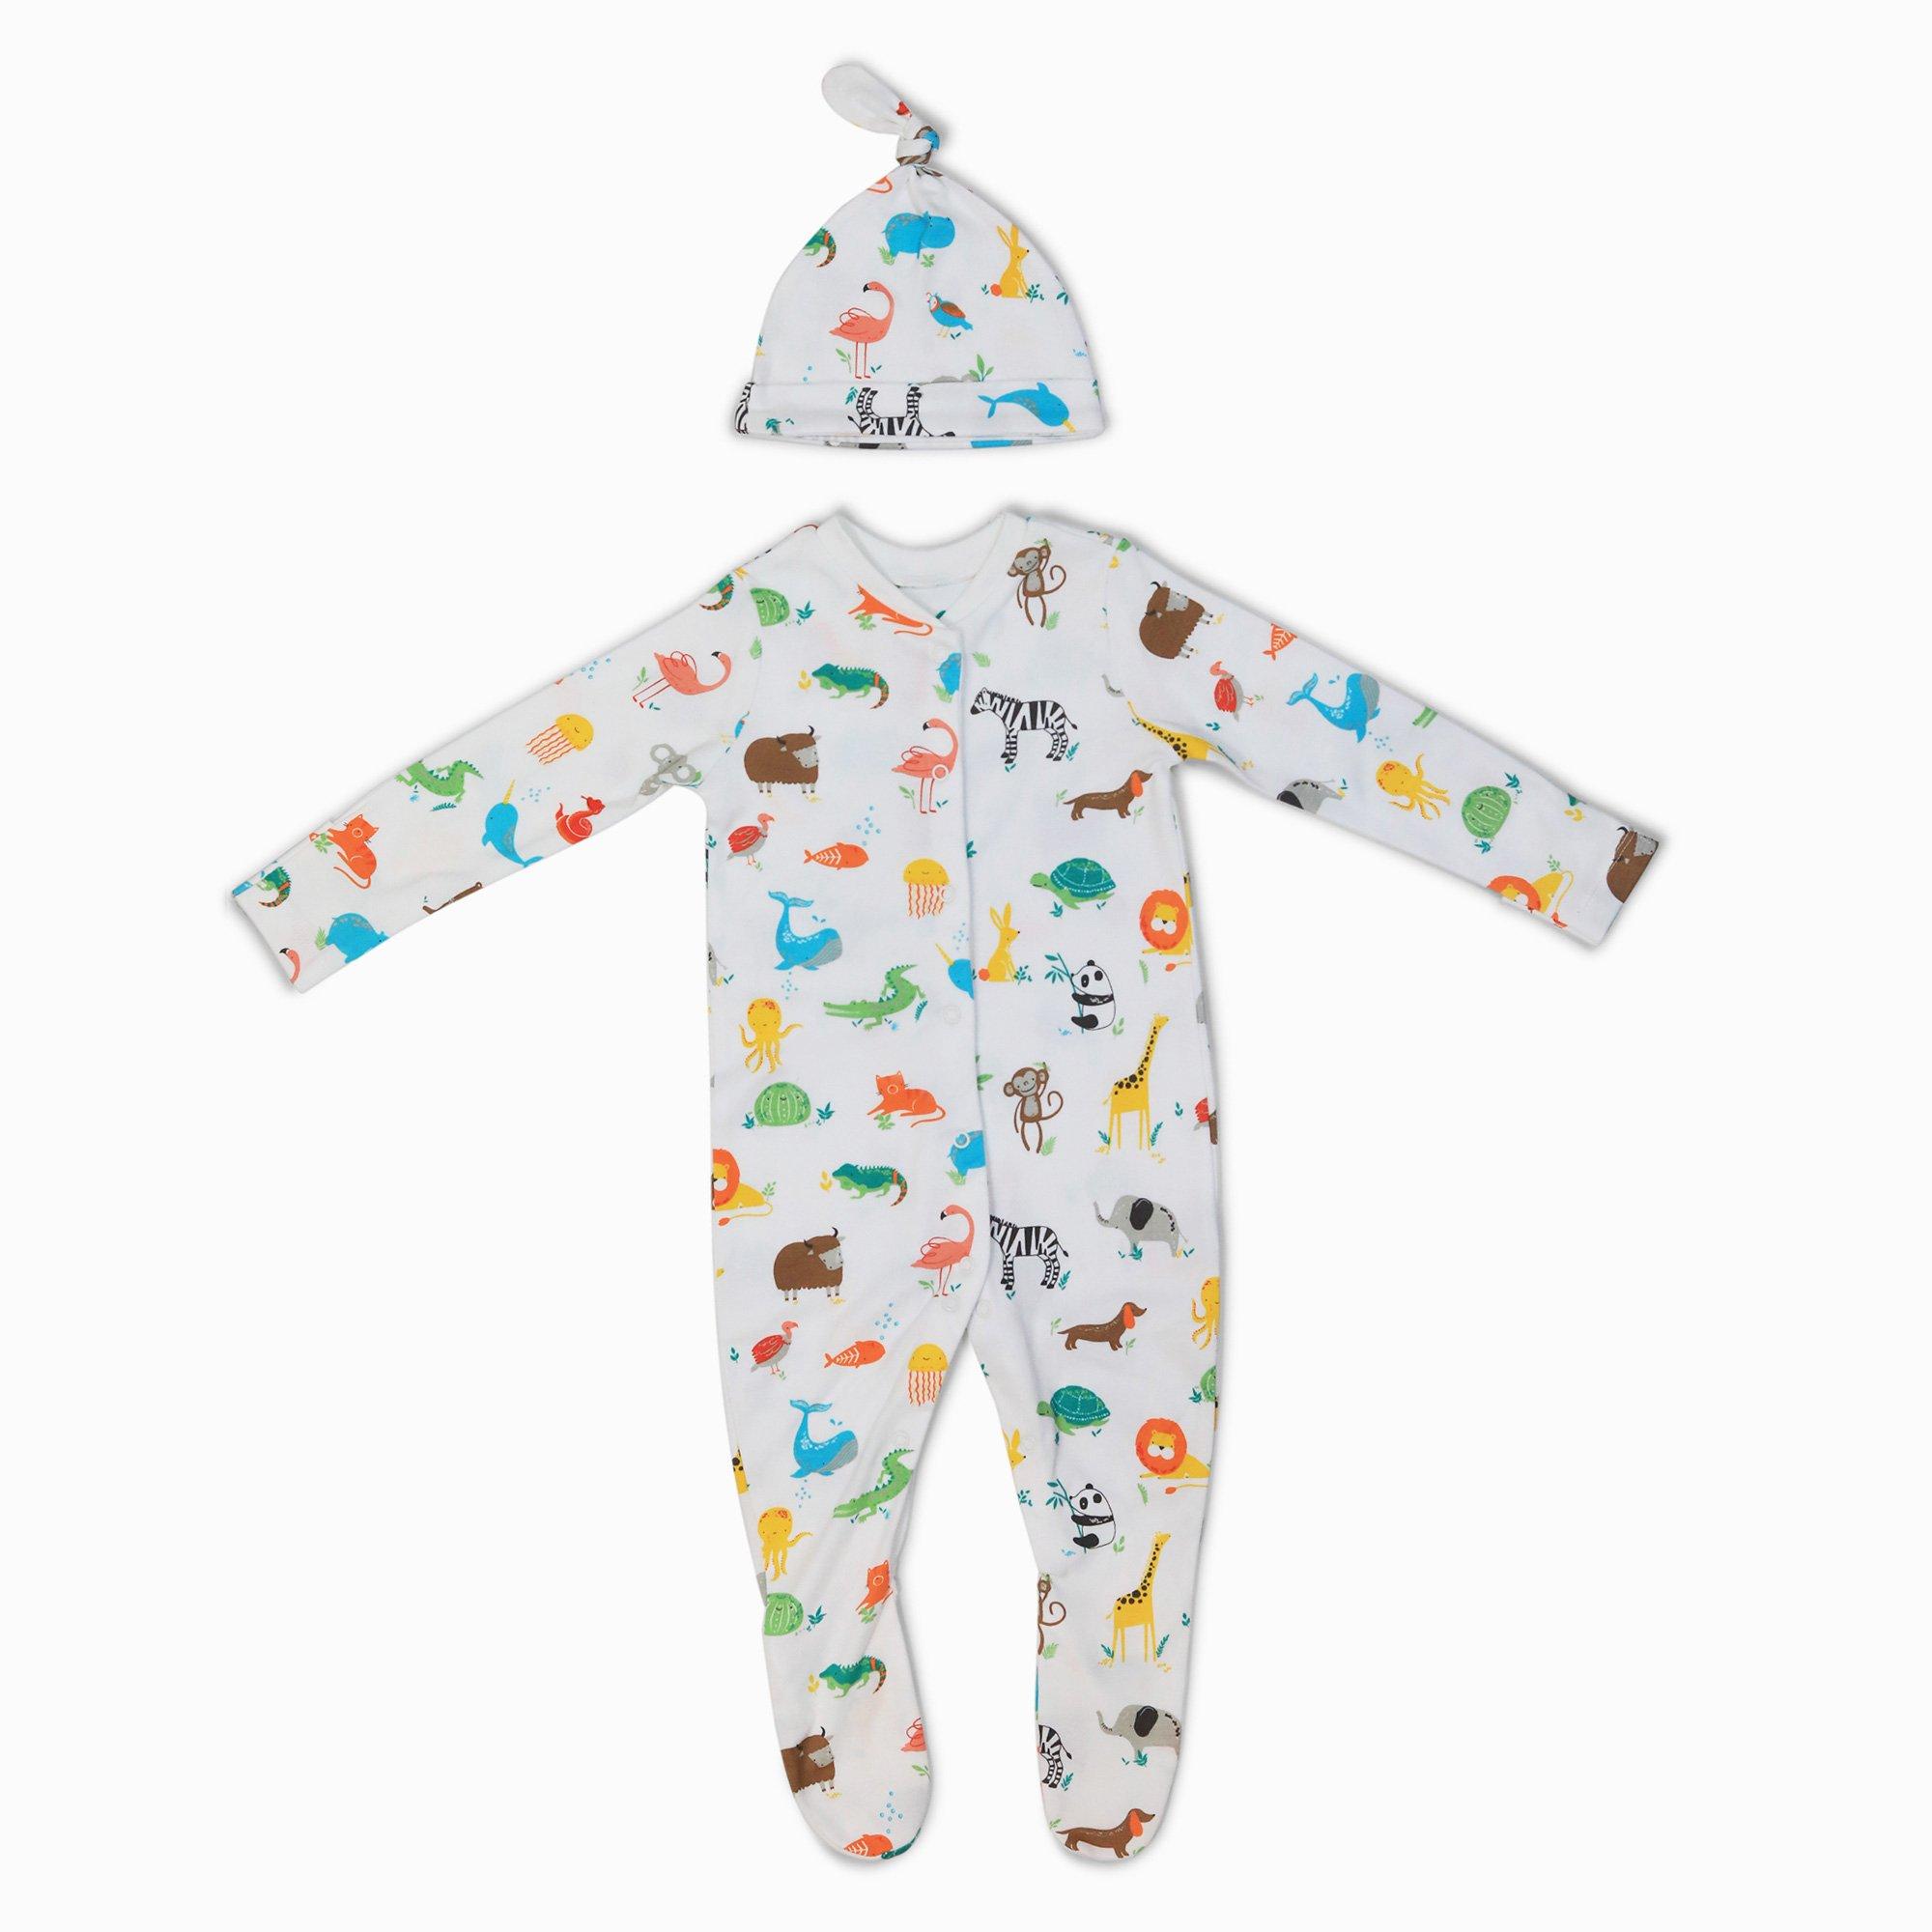 Animal Alphabet 100% BCI Cotton Jersey White Baby Sleepsuit and Hat